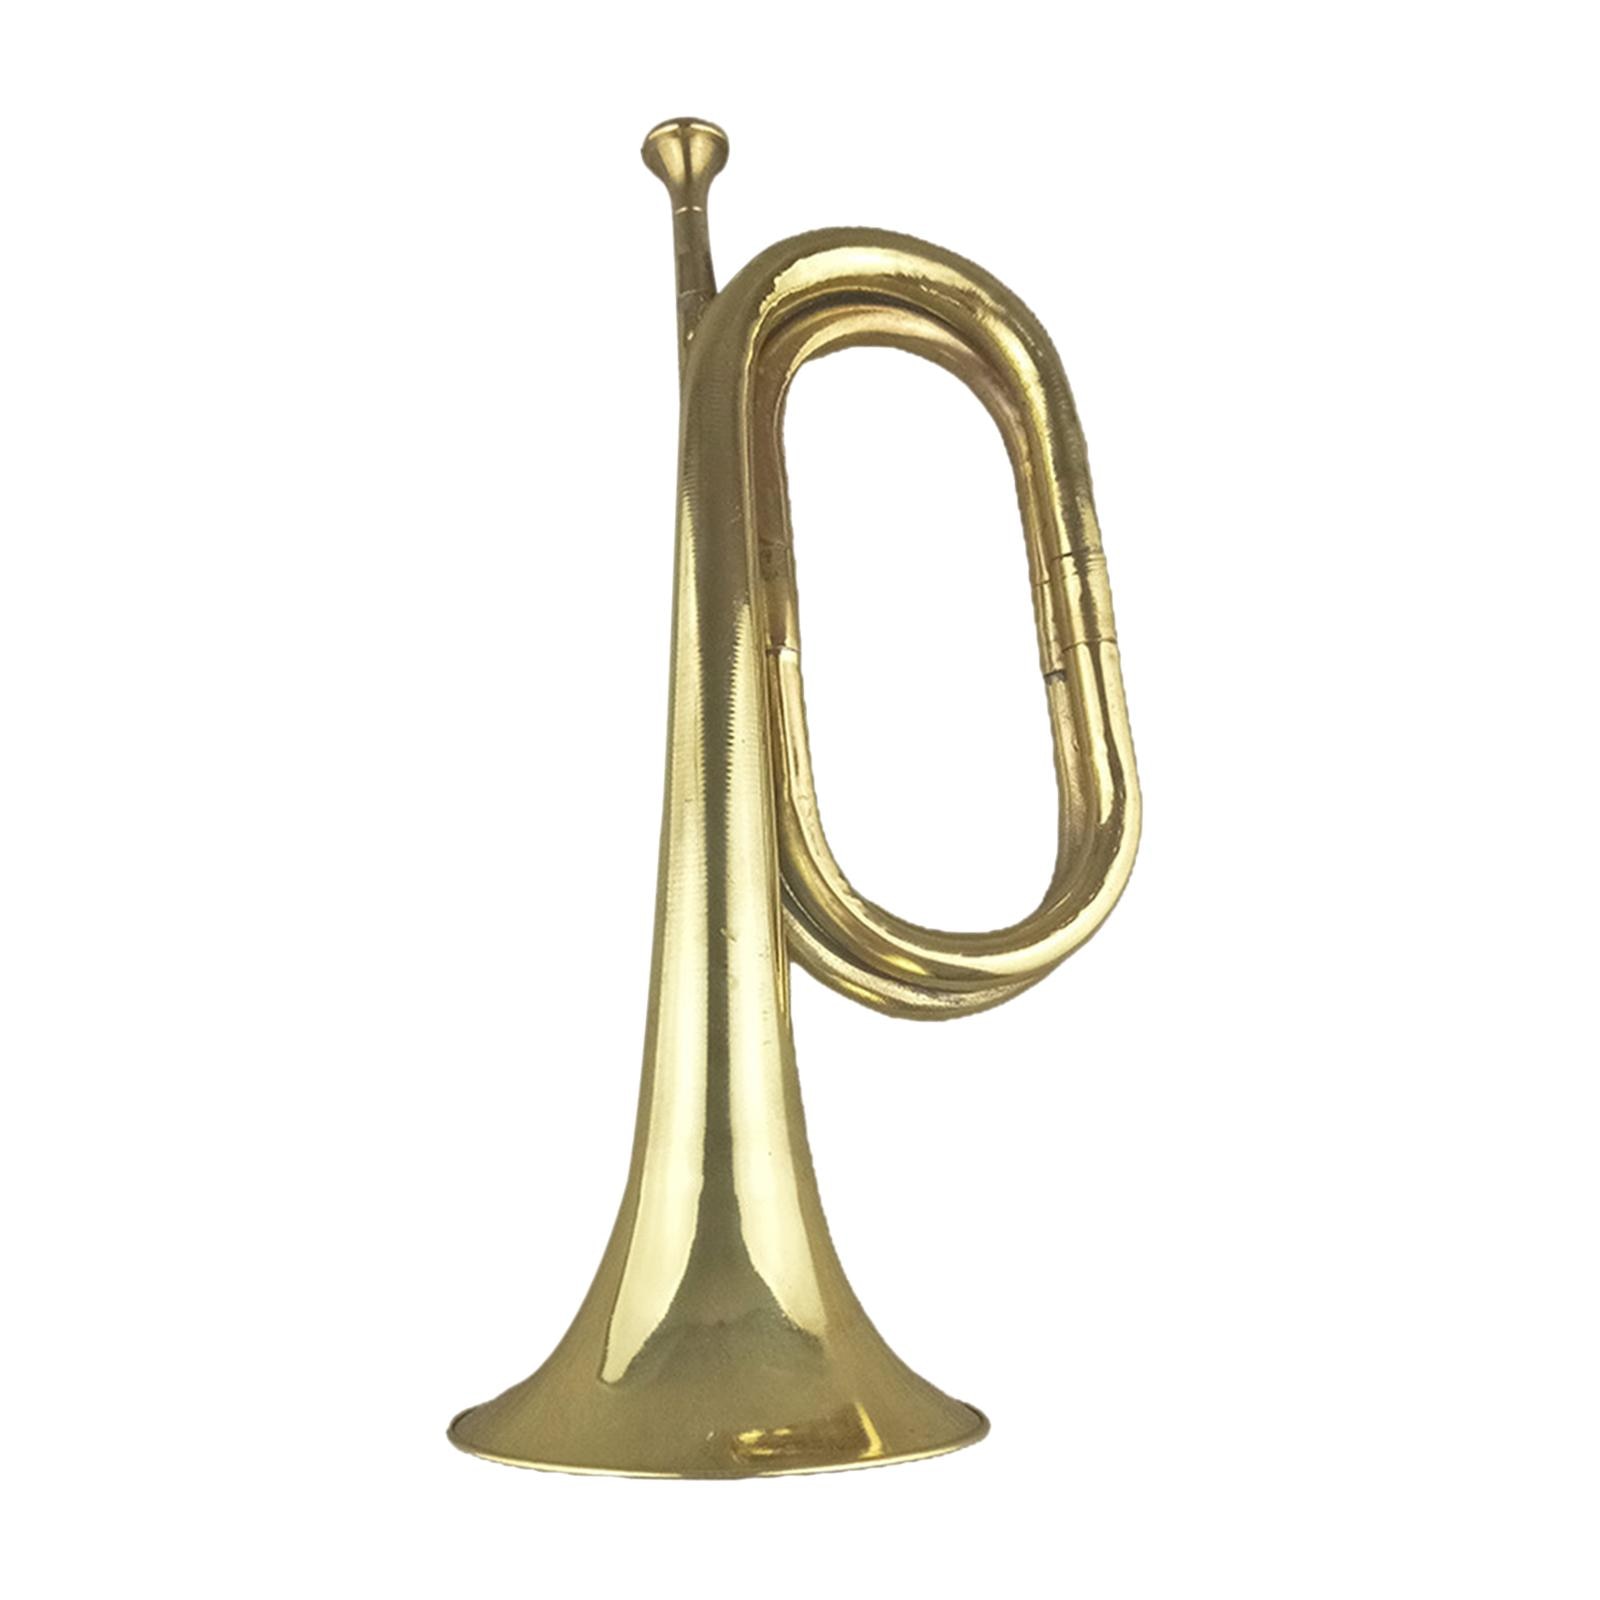 Brass Marching Bugle Music Instrument Early Learning Toy Trumpet for s Kids Children Beginners Scouting